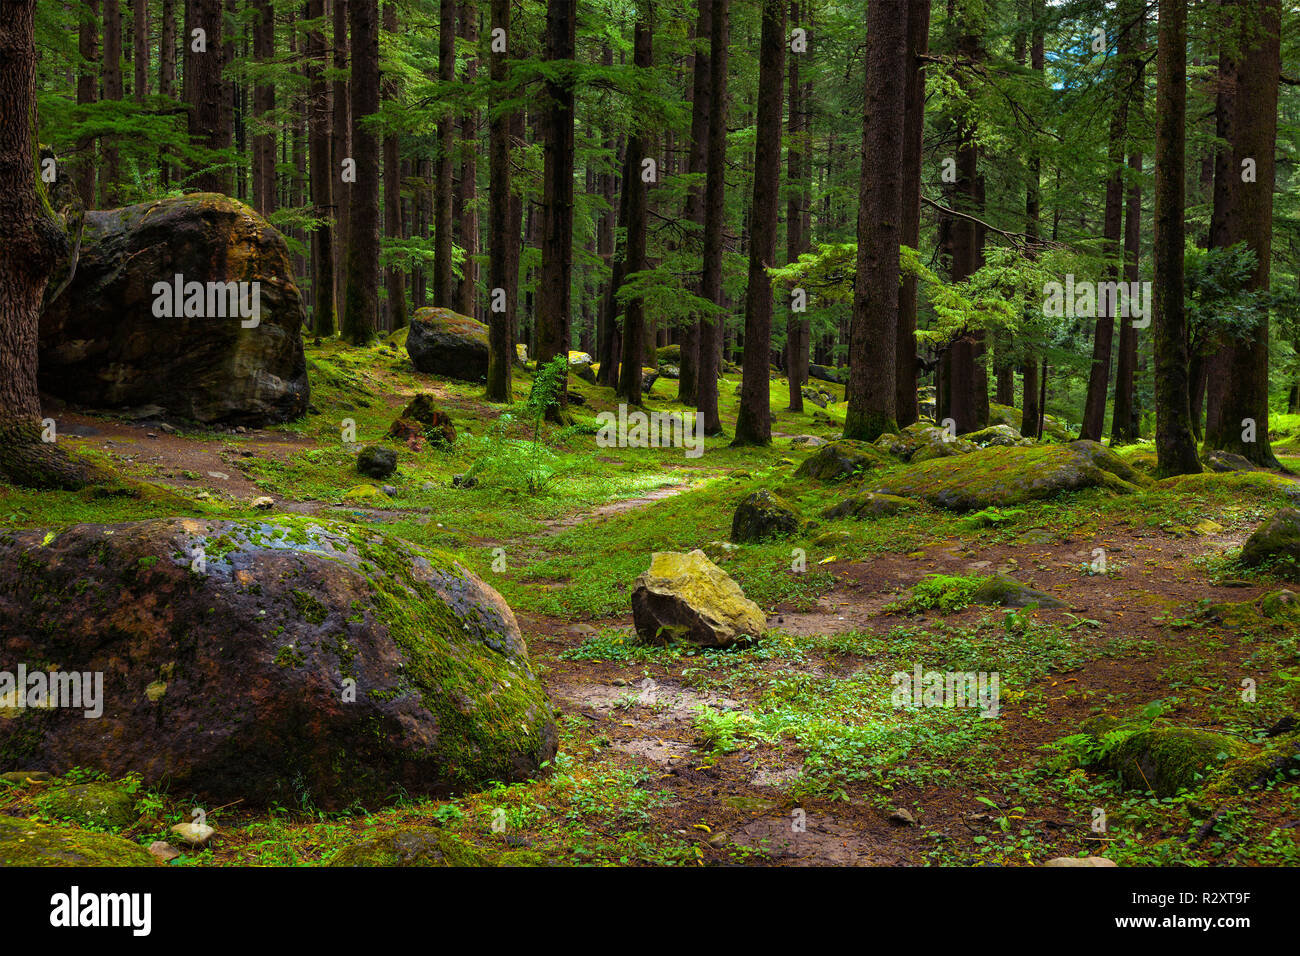 Pine forest with rocks and green moss Stock Photo